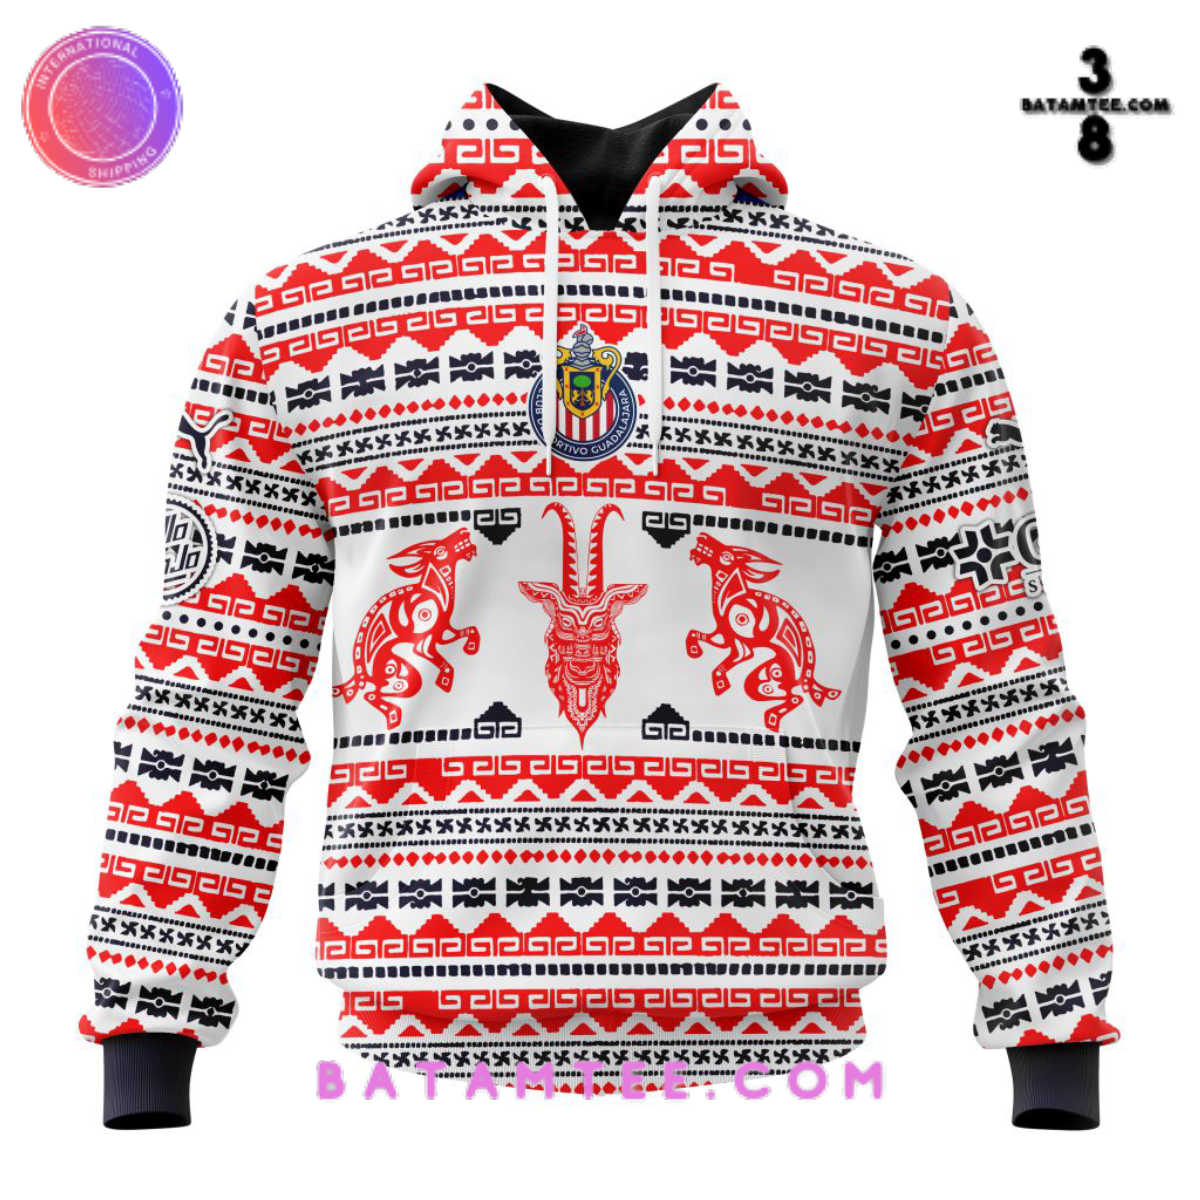 Liga MX Club Deportivo Guadalajara Team Jersey With Aztec Design Personalized Hoodie's Overview - Batamtee Shop - Threads & Totes: Your Style Destination